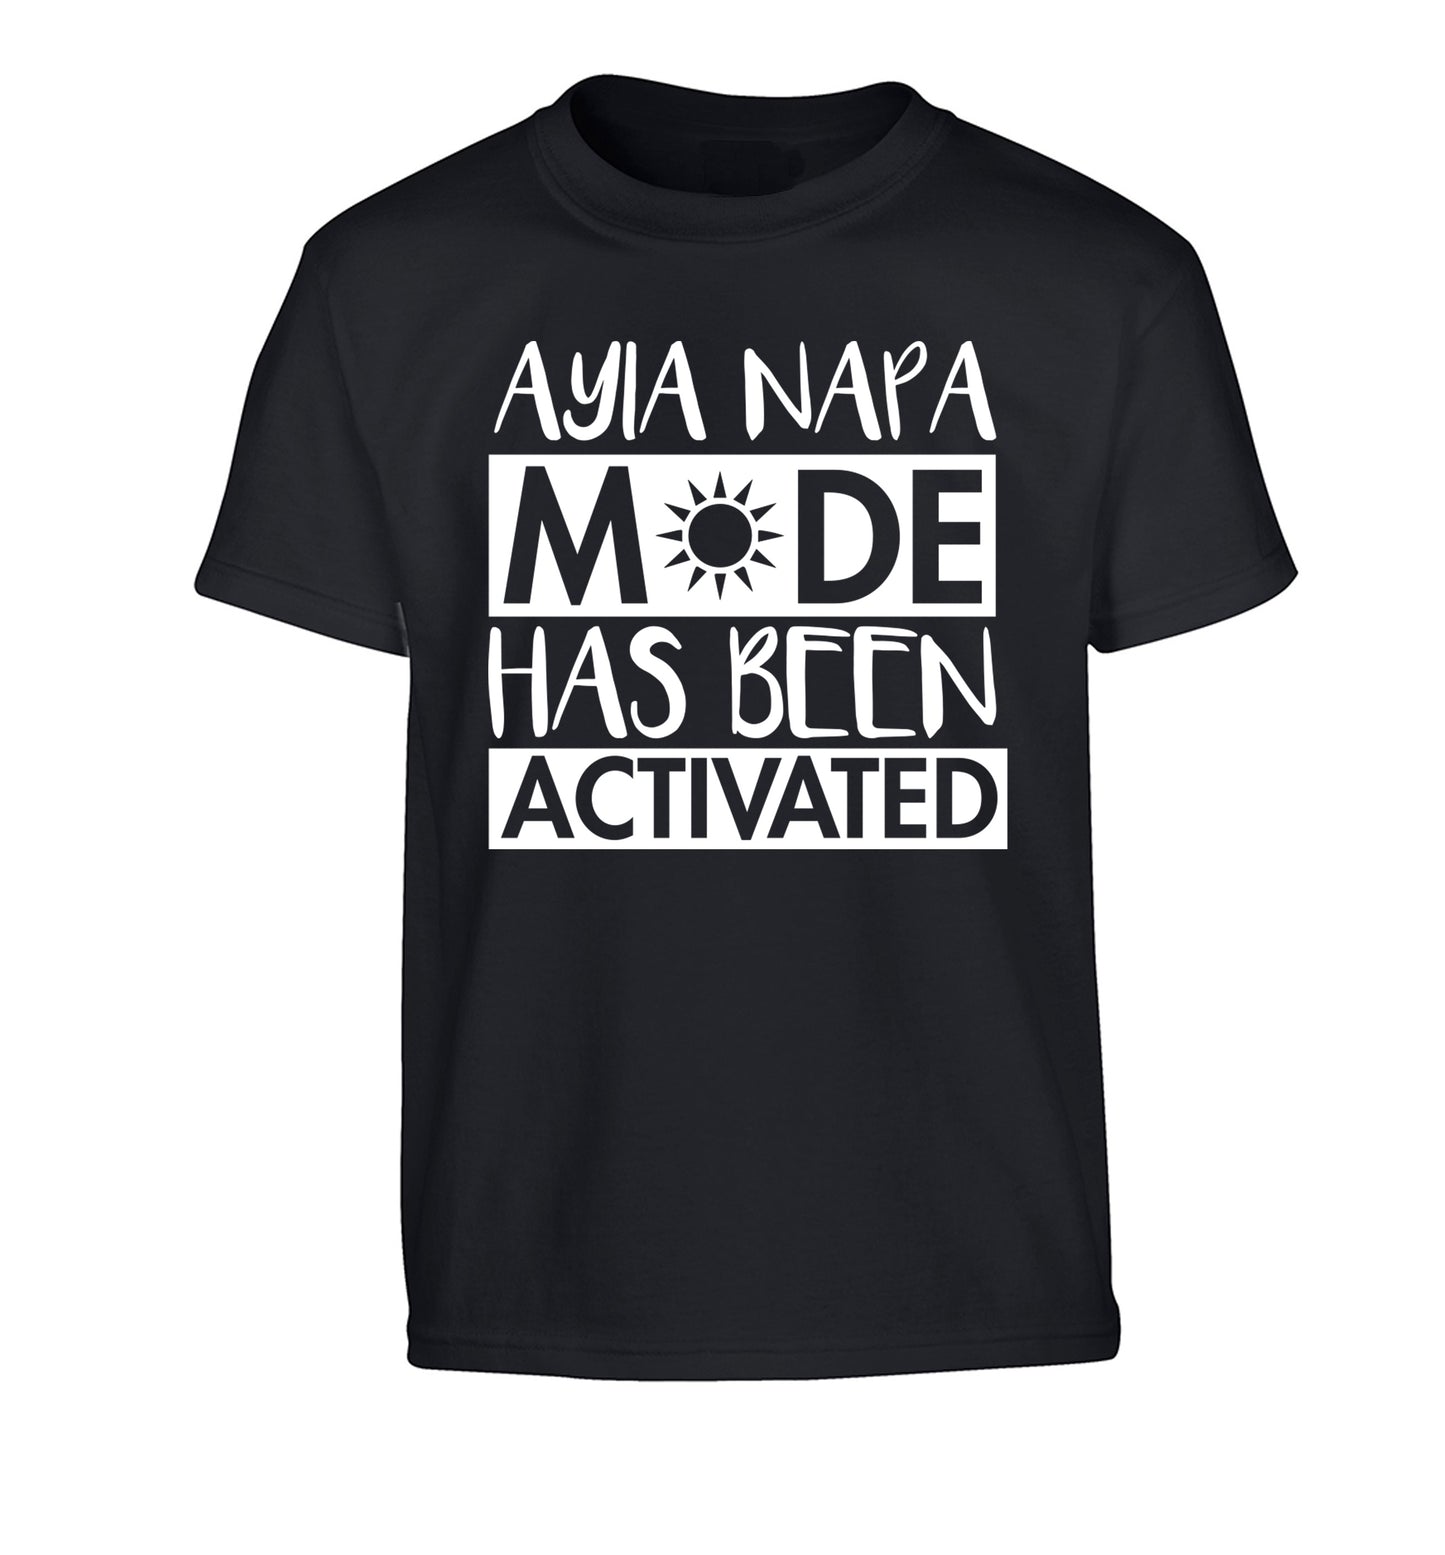 Ayia Napa mode has been activated Children's black Tshirt 12-13 Years